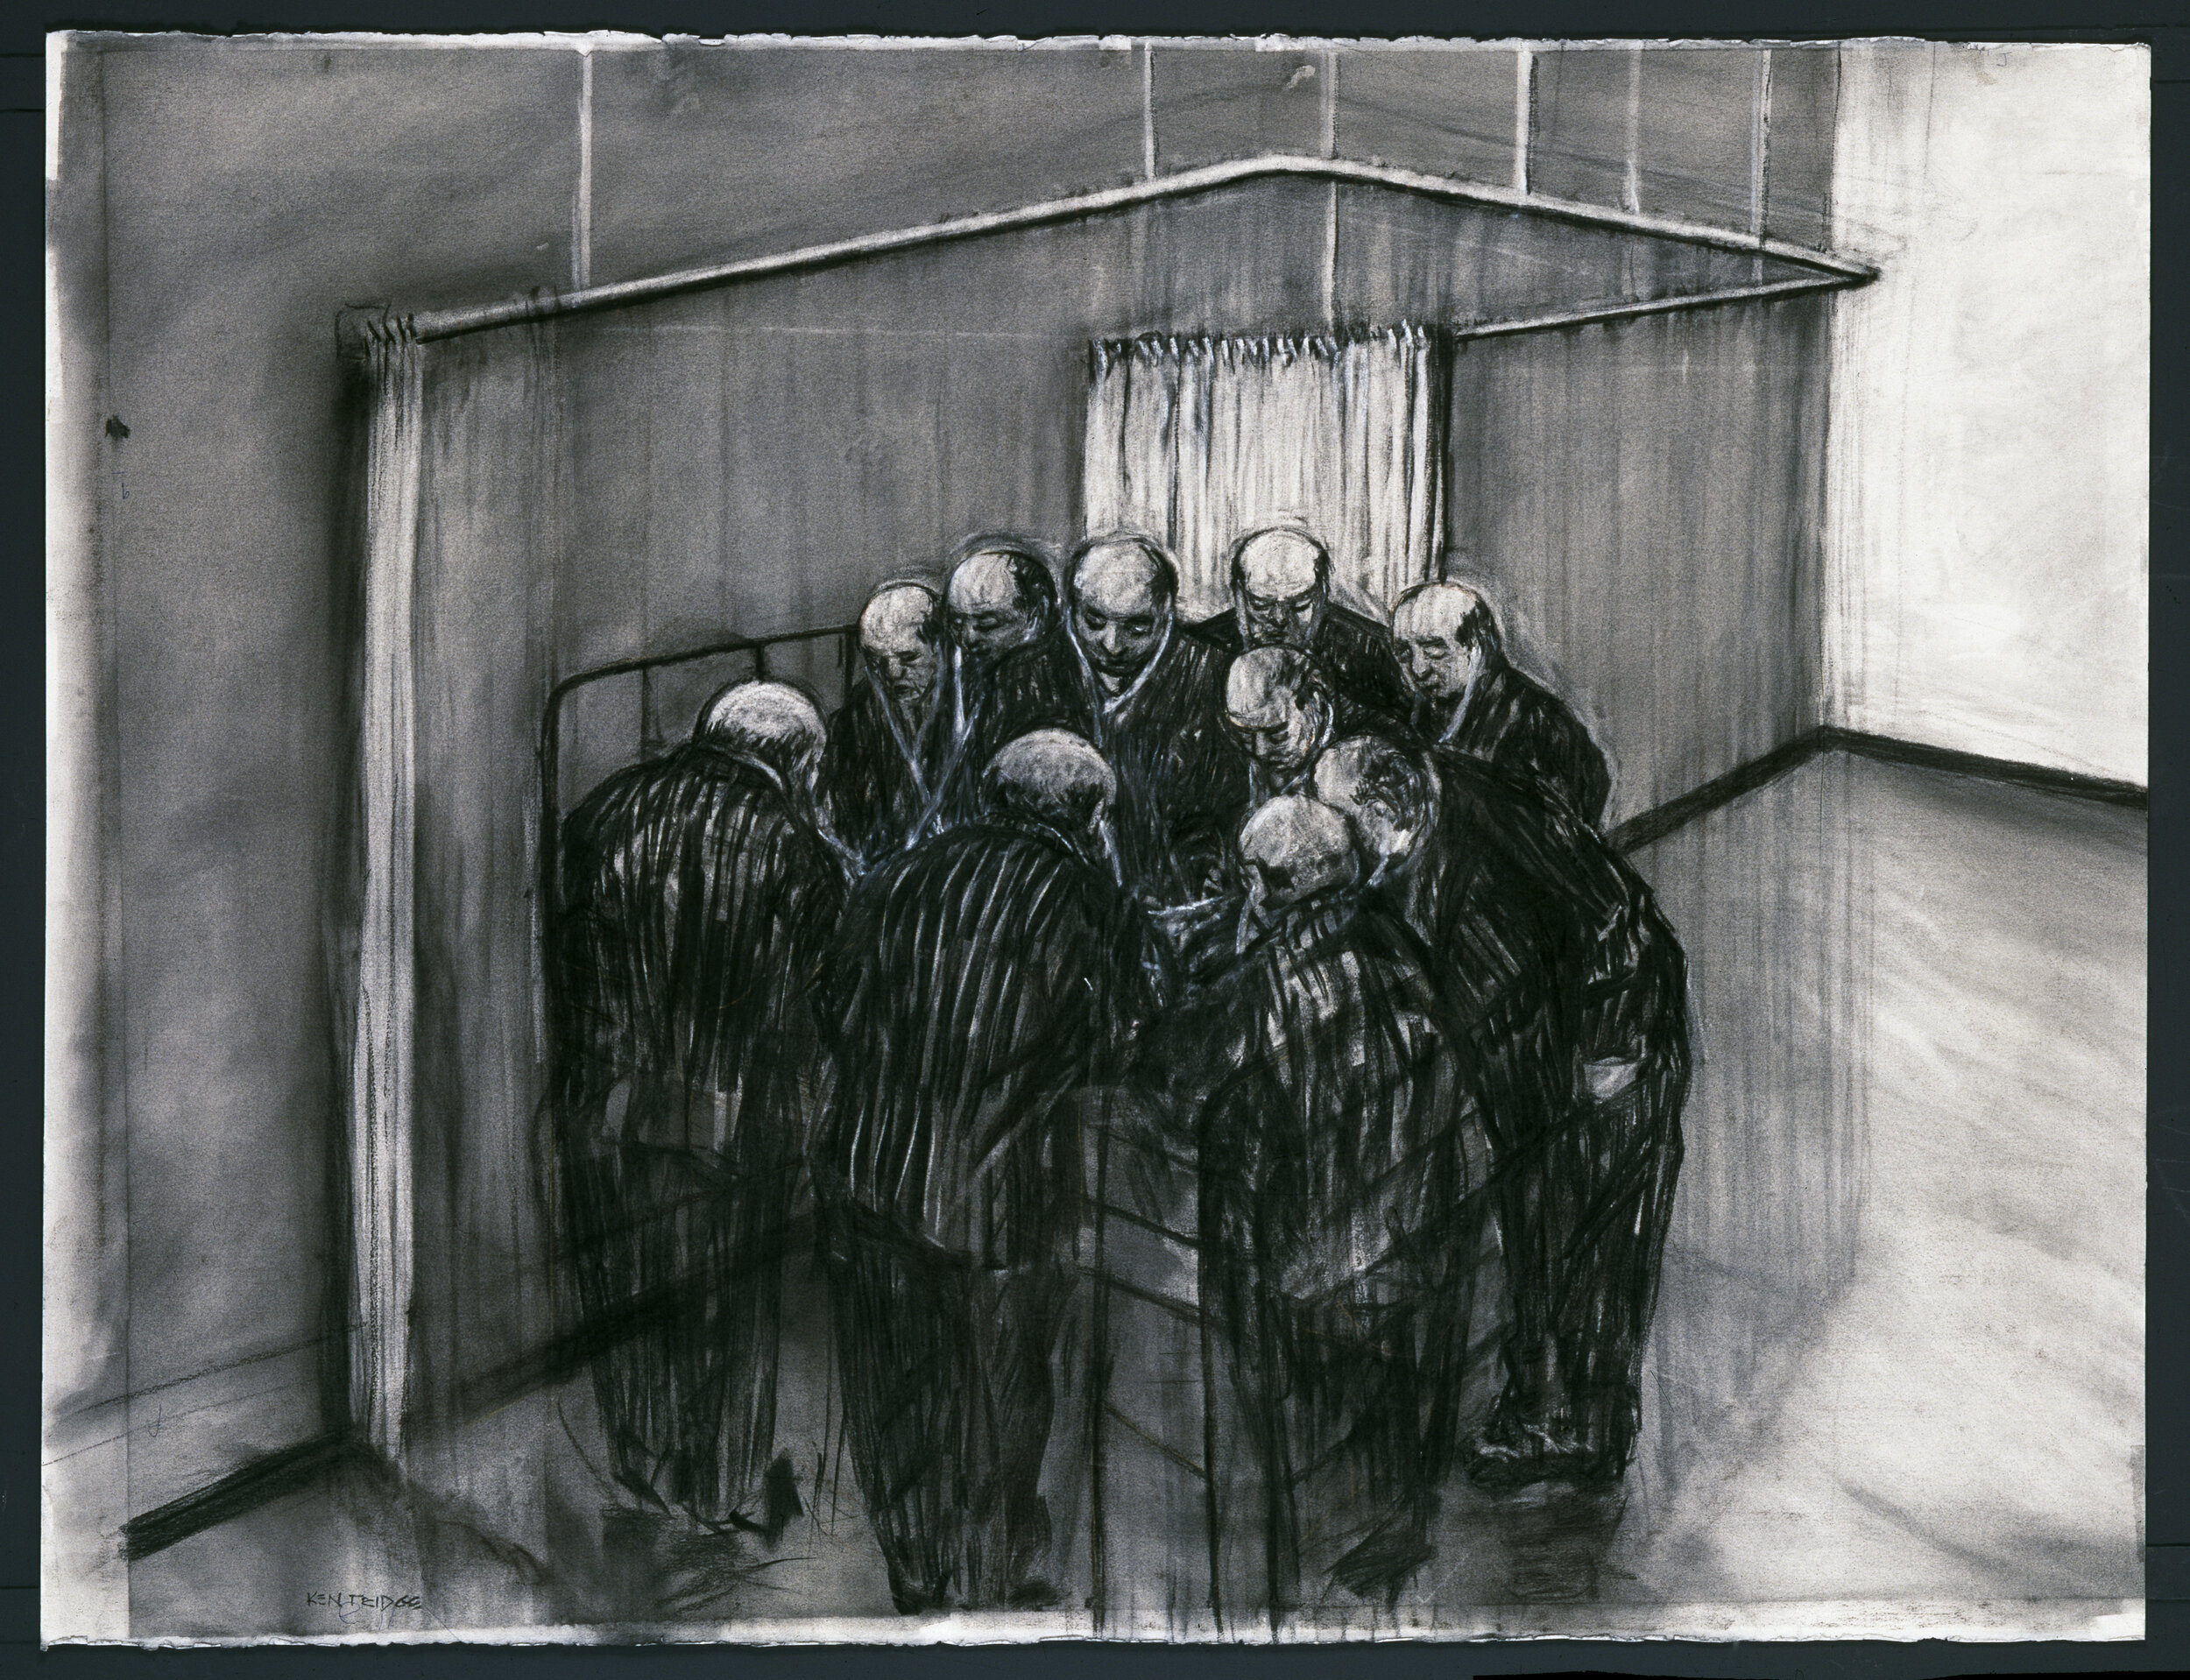 William Kentridge, 10 Drawings for Projection - History of the Main Complaint (1996)_06.jpg